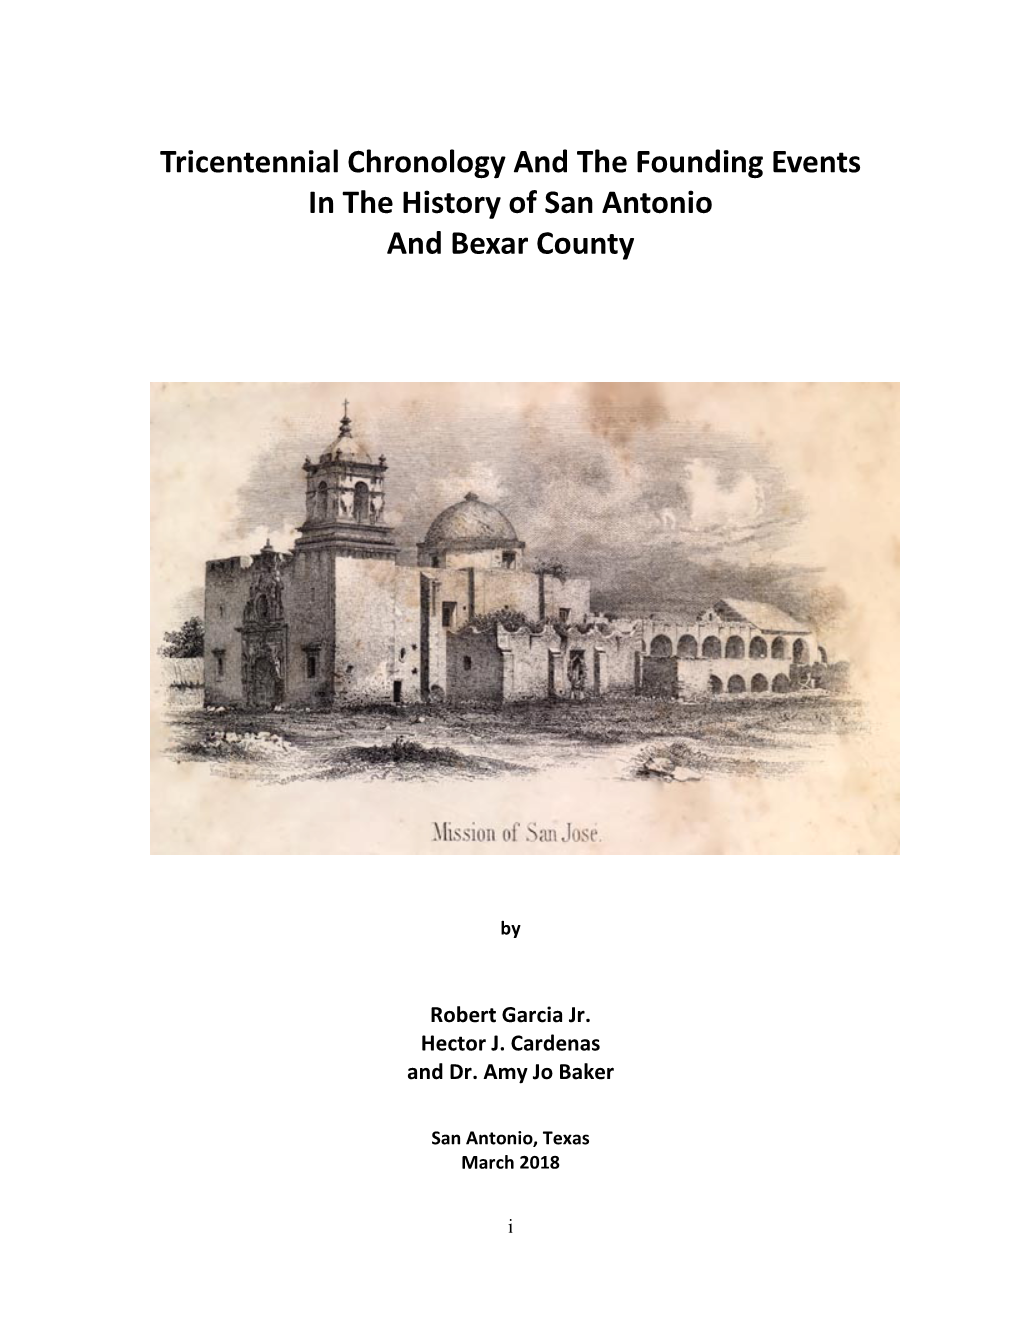 Tricentennial Chronology and the Founding Events in the History of San Antonio and Bexar County